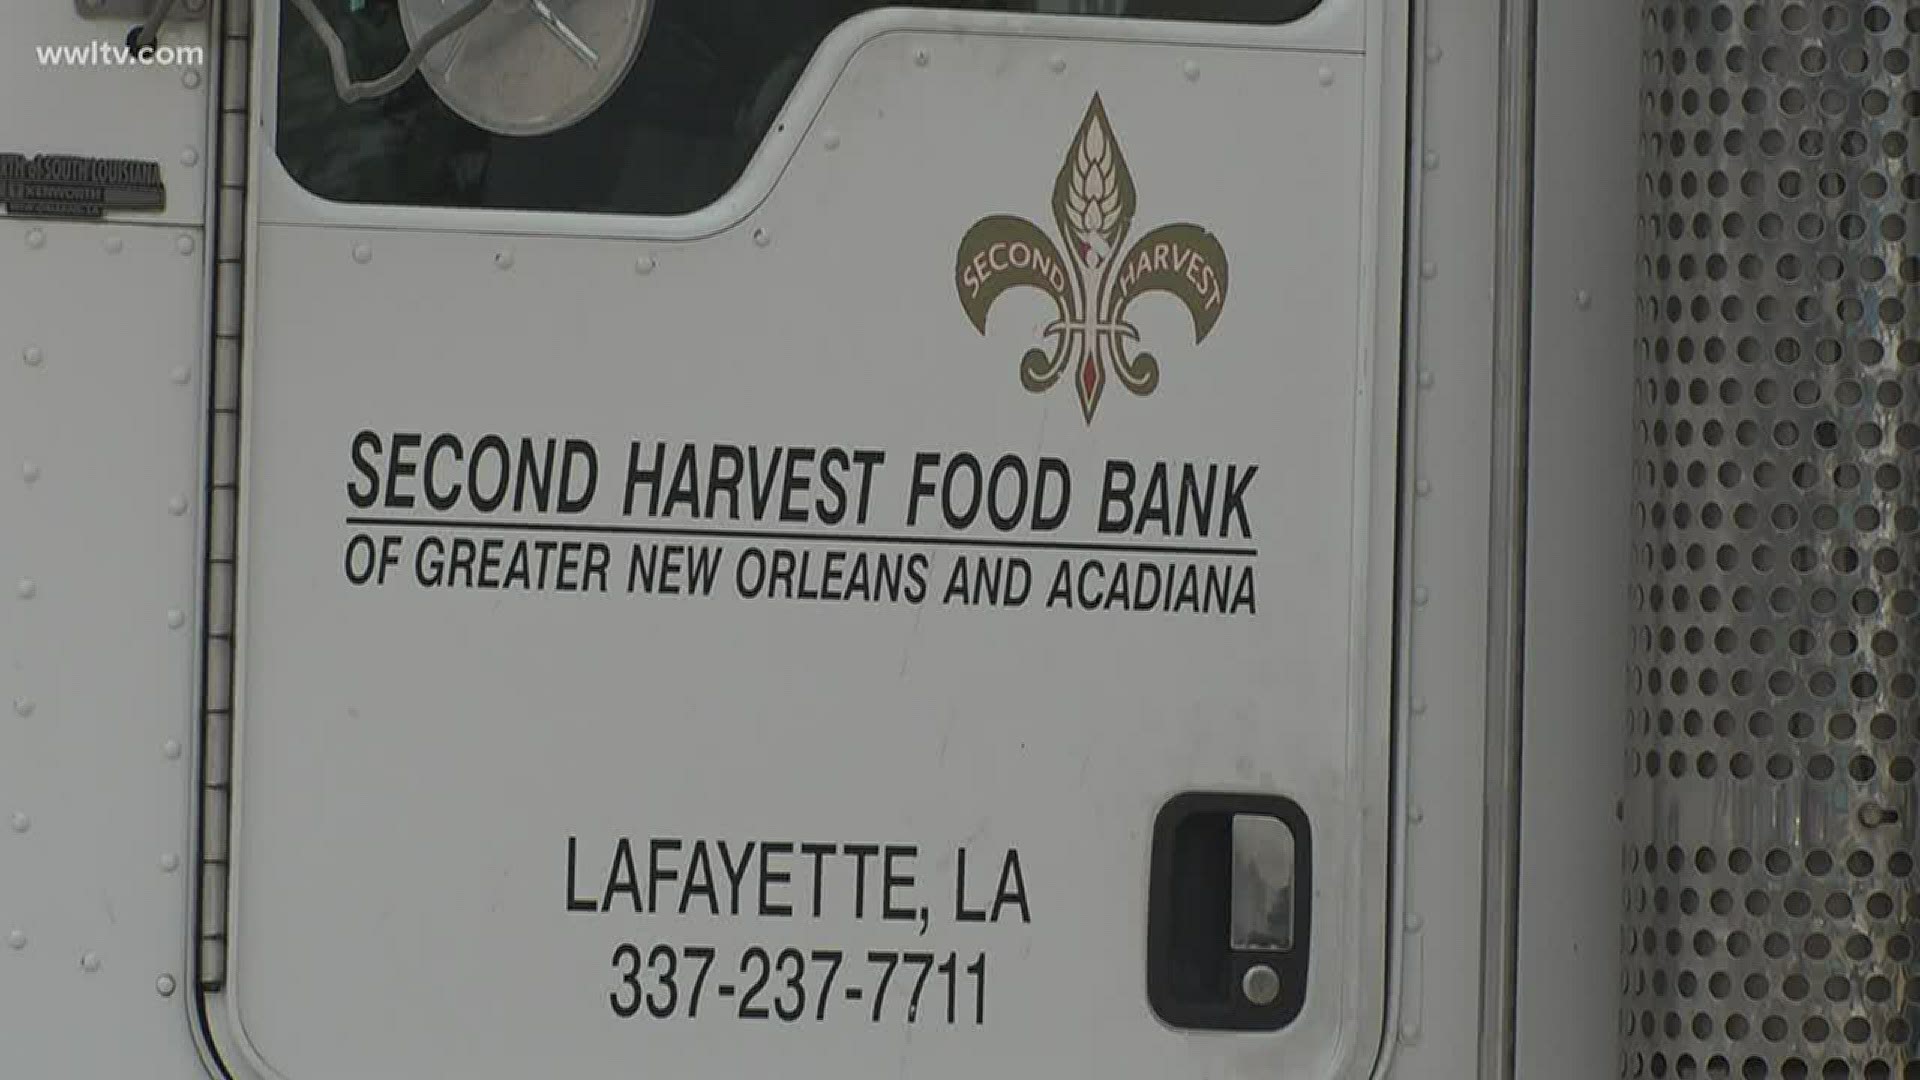 Much more than the location can handle, 450 people showed up at the Second Harvest Food Bank's Elmwood distribution center just last week.